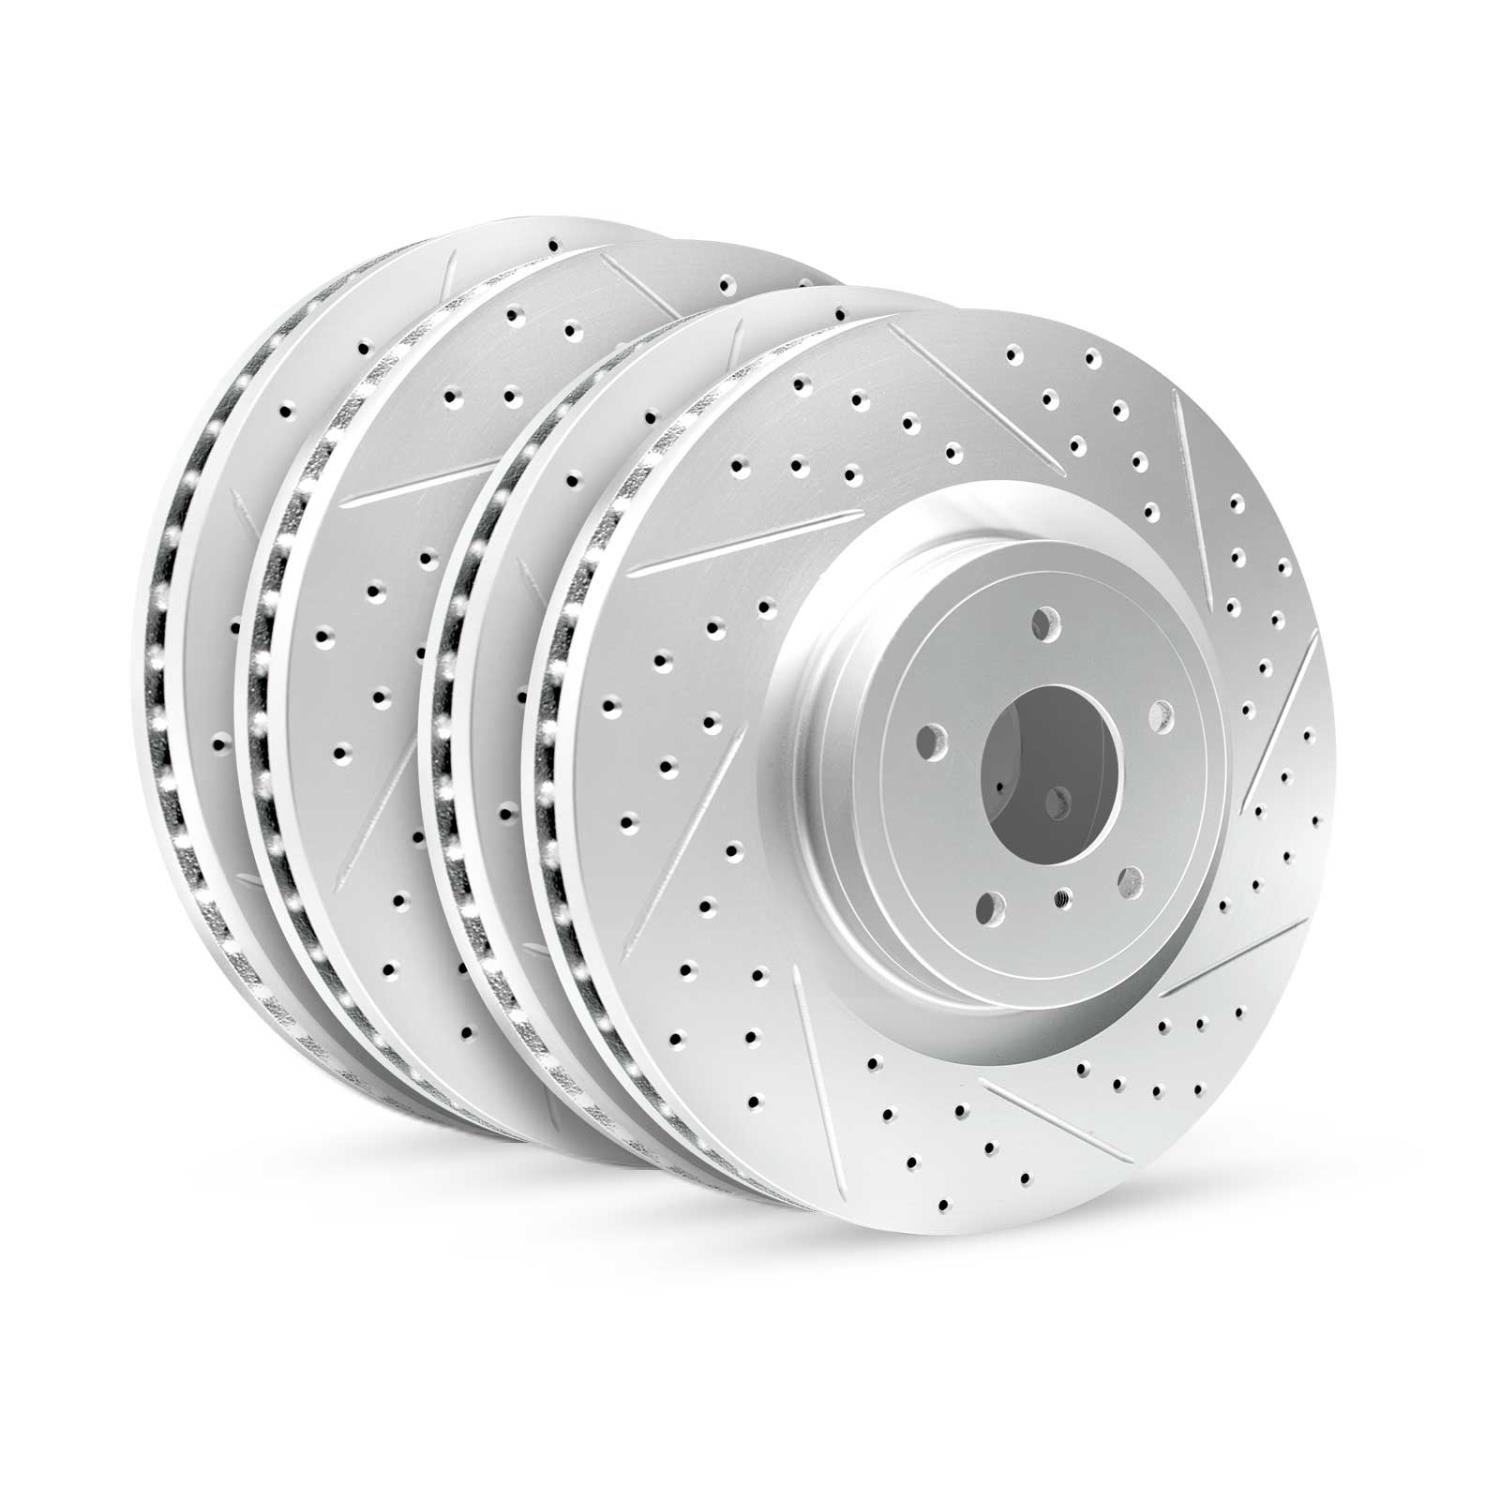 GEO-Carbon Drilled/Slotted Rotors, 2010-2016 Kia/Hyundai/Genesis, Position: Front/Rear